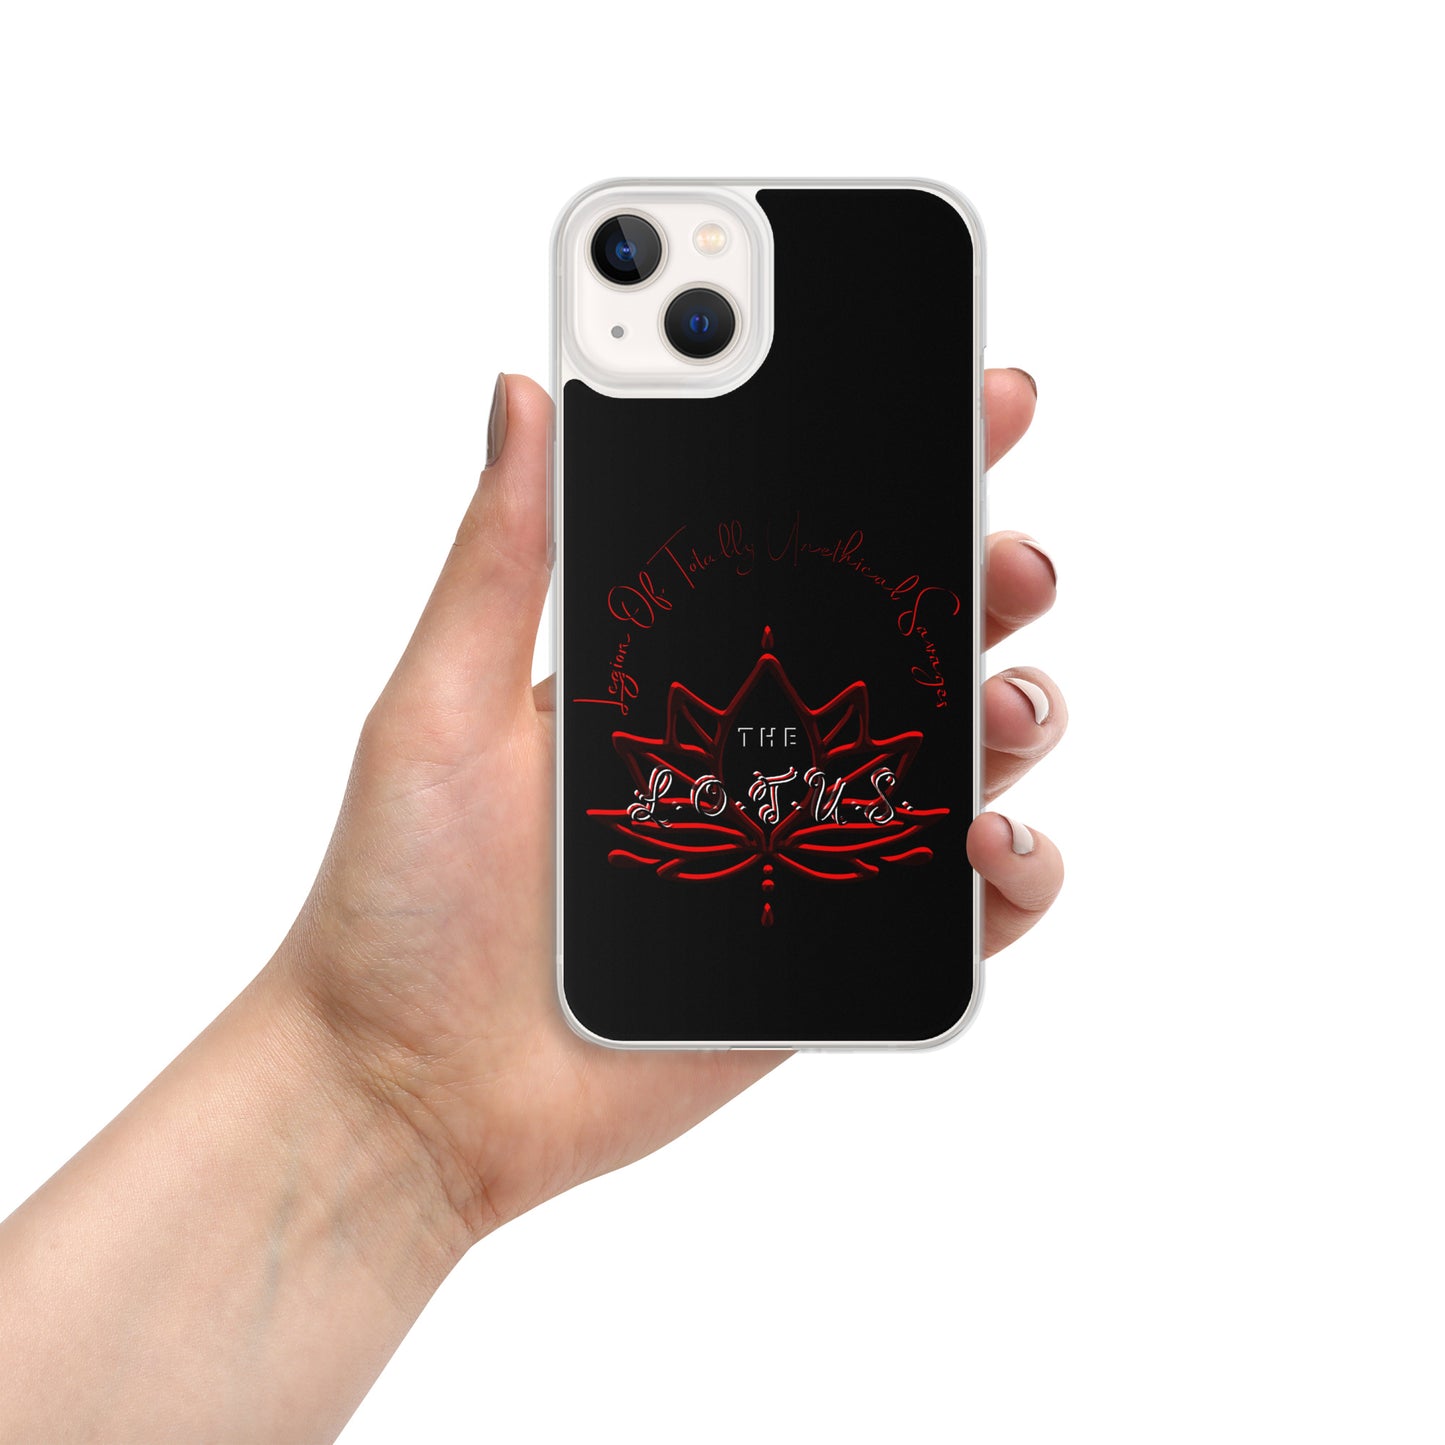 'The LOTUS' Logo 2 - Black Case for iPhone®